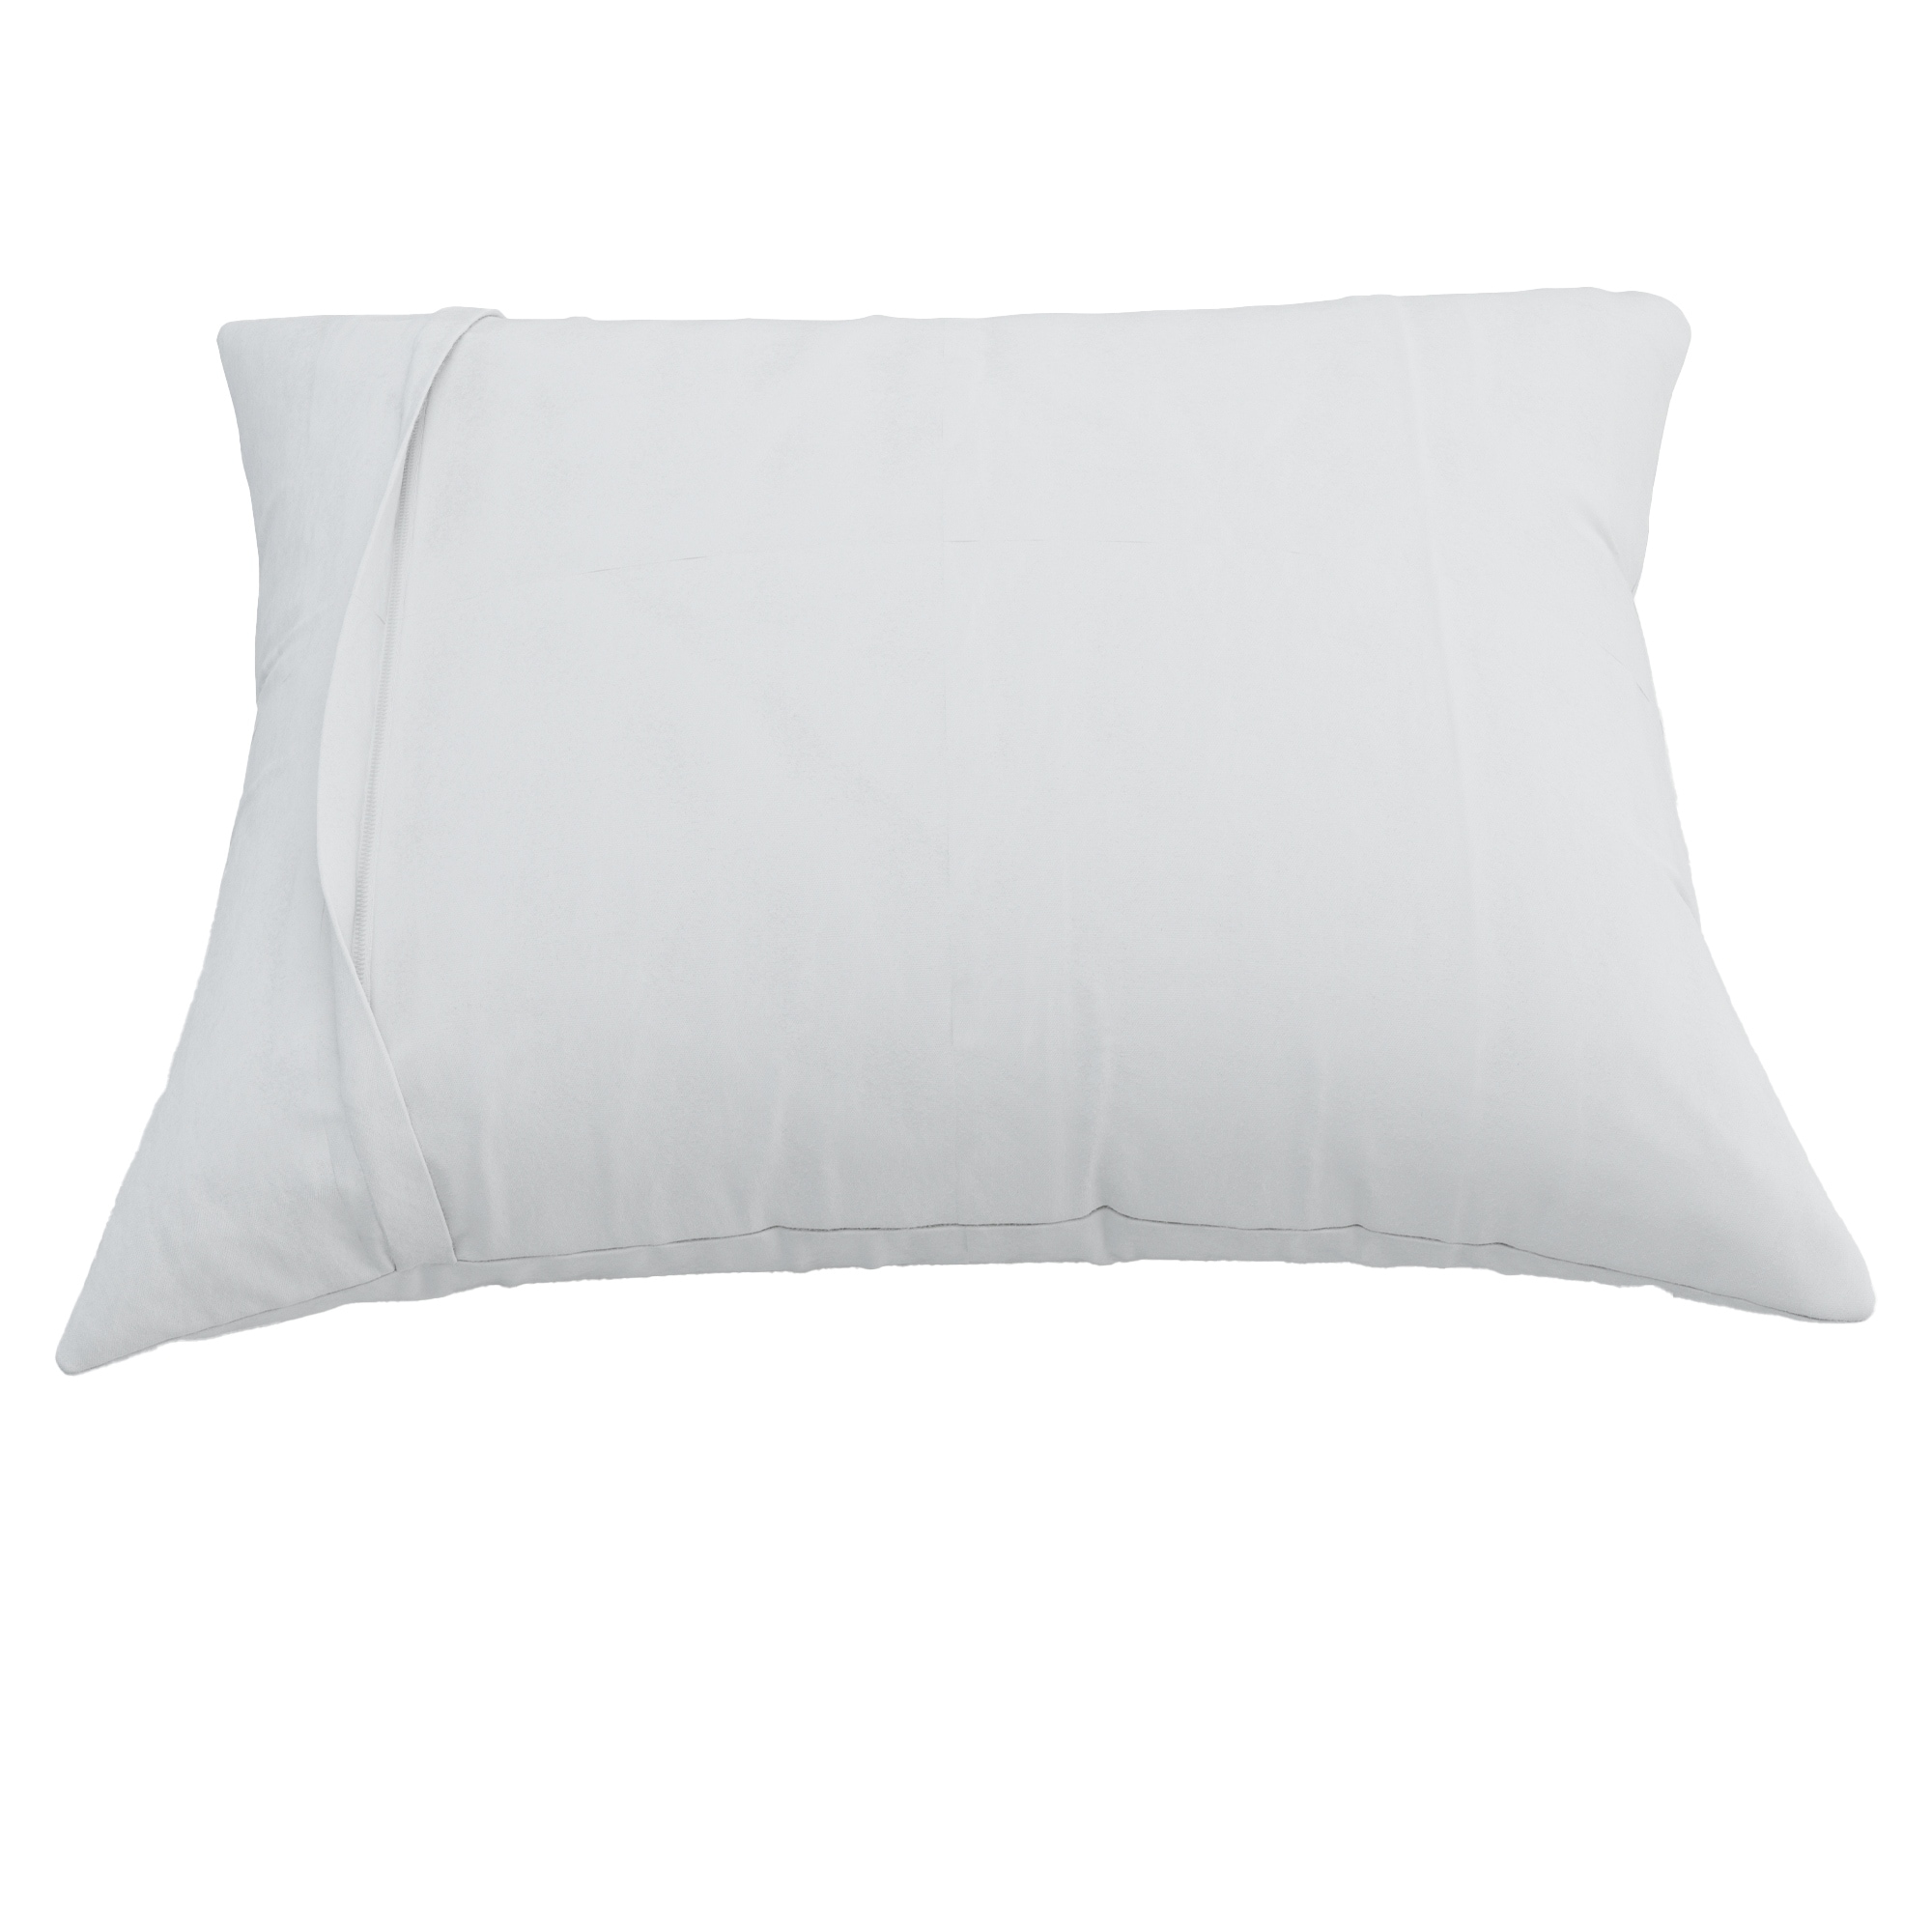 https://ak1.ostkcdn.com/images/products/is/images/direct/eb3ab4b819a759825db8a5f6e99beacceabcb2eb/Zippered%2C-100%25-Cotton-Pillow-Protector%2C-Breathable%2C-Allergen-Barrier-Pillow-Cover.jpg